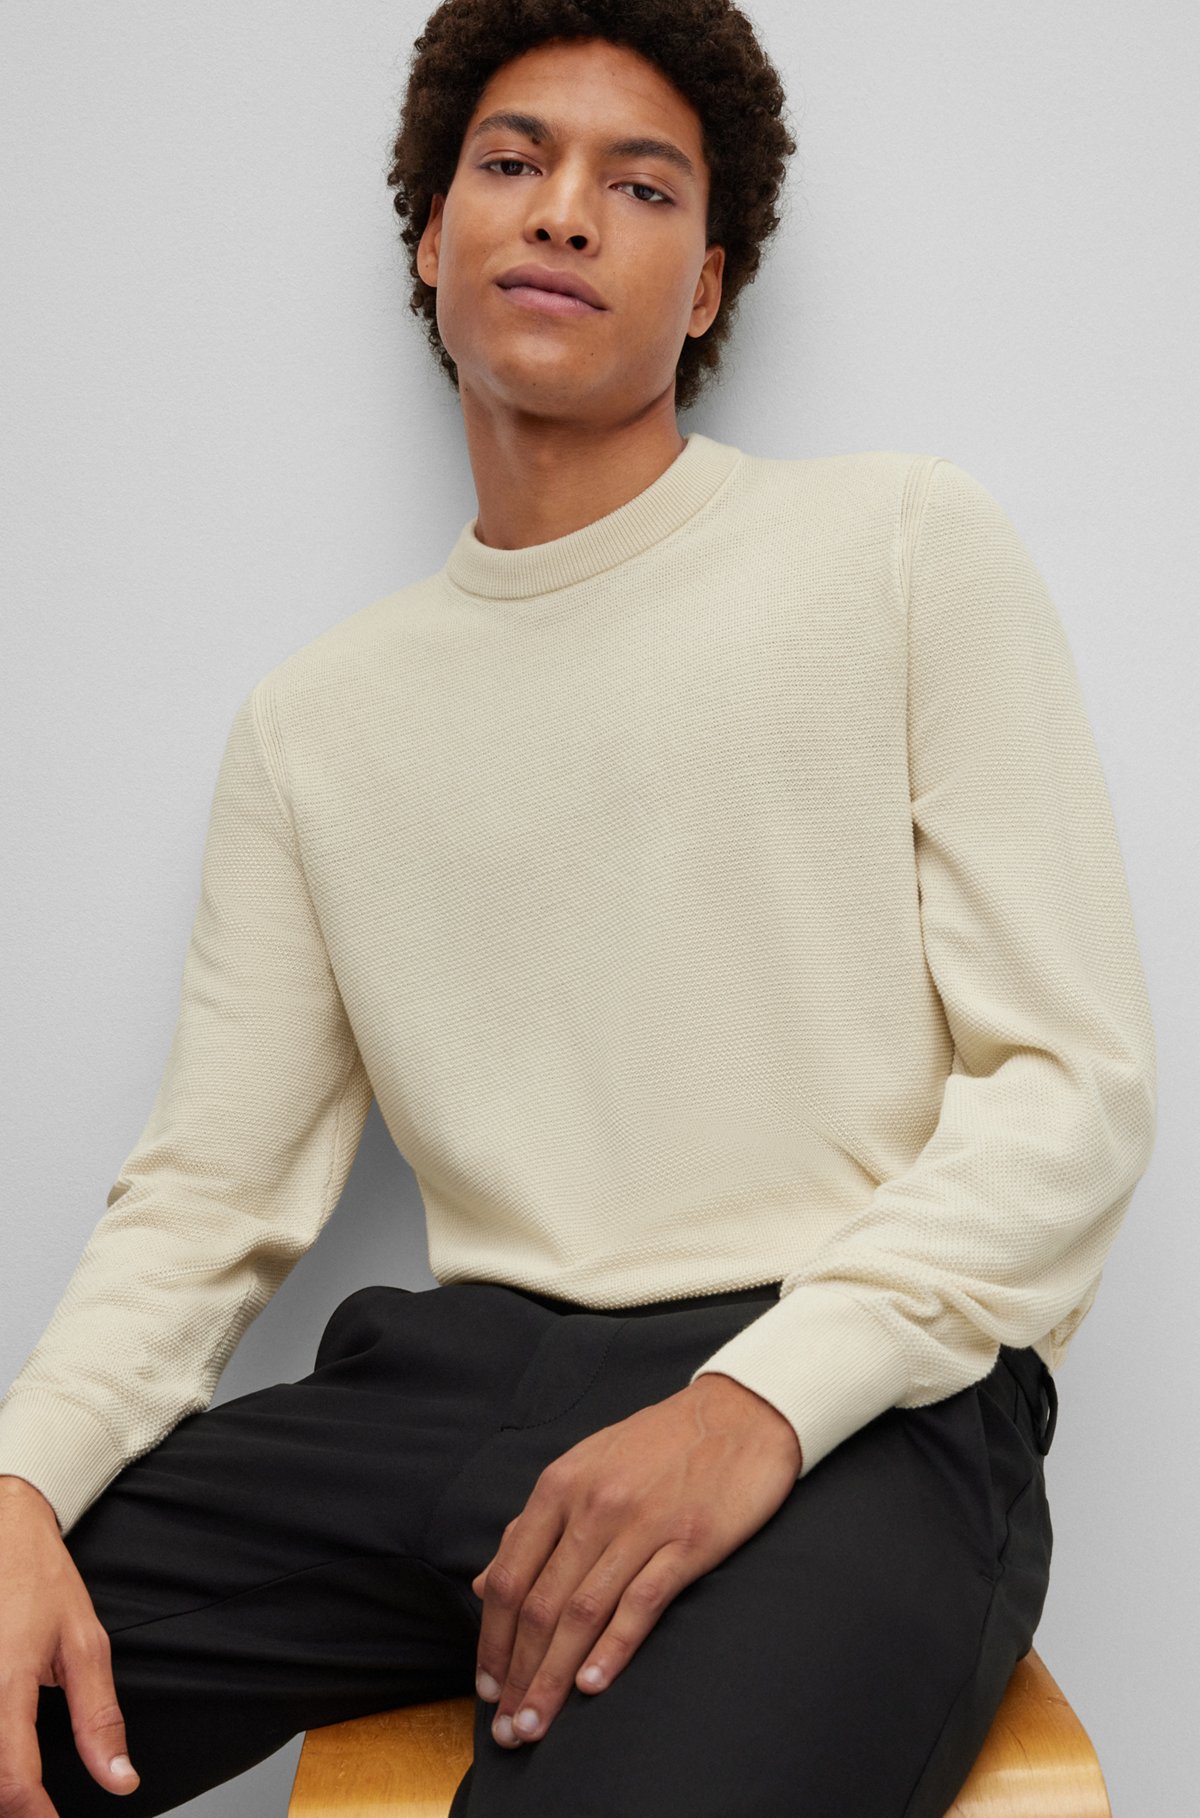 BOSS - Crew-neck sweater in structured cotton with stripe details